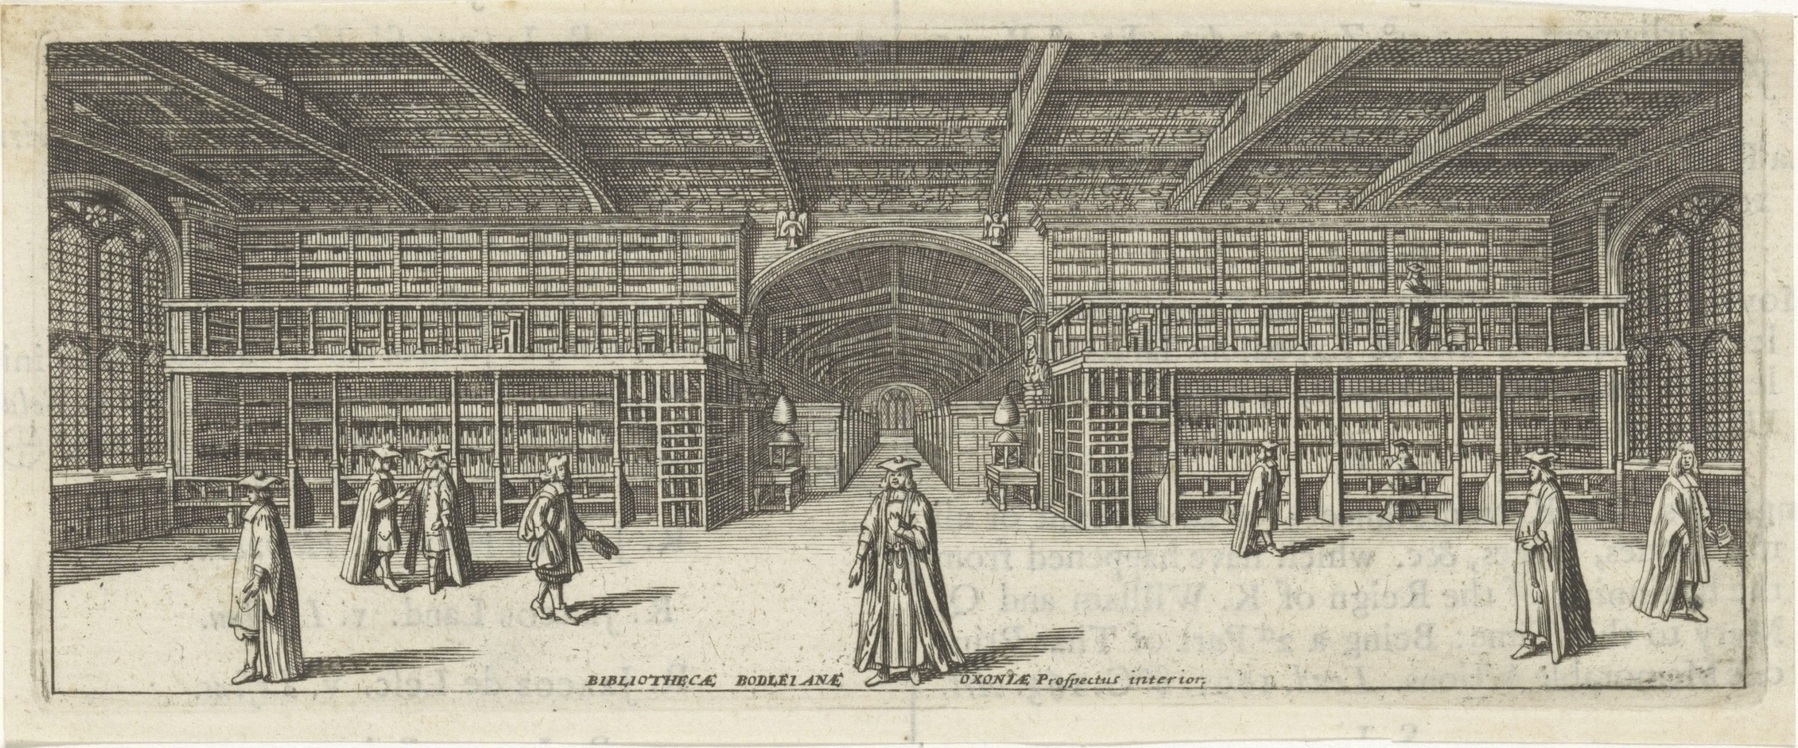 A drawing of the interior of the Bodleian Library in Oxford.